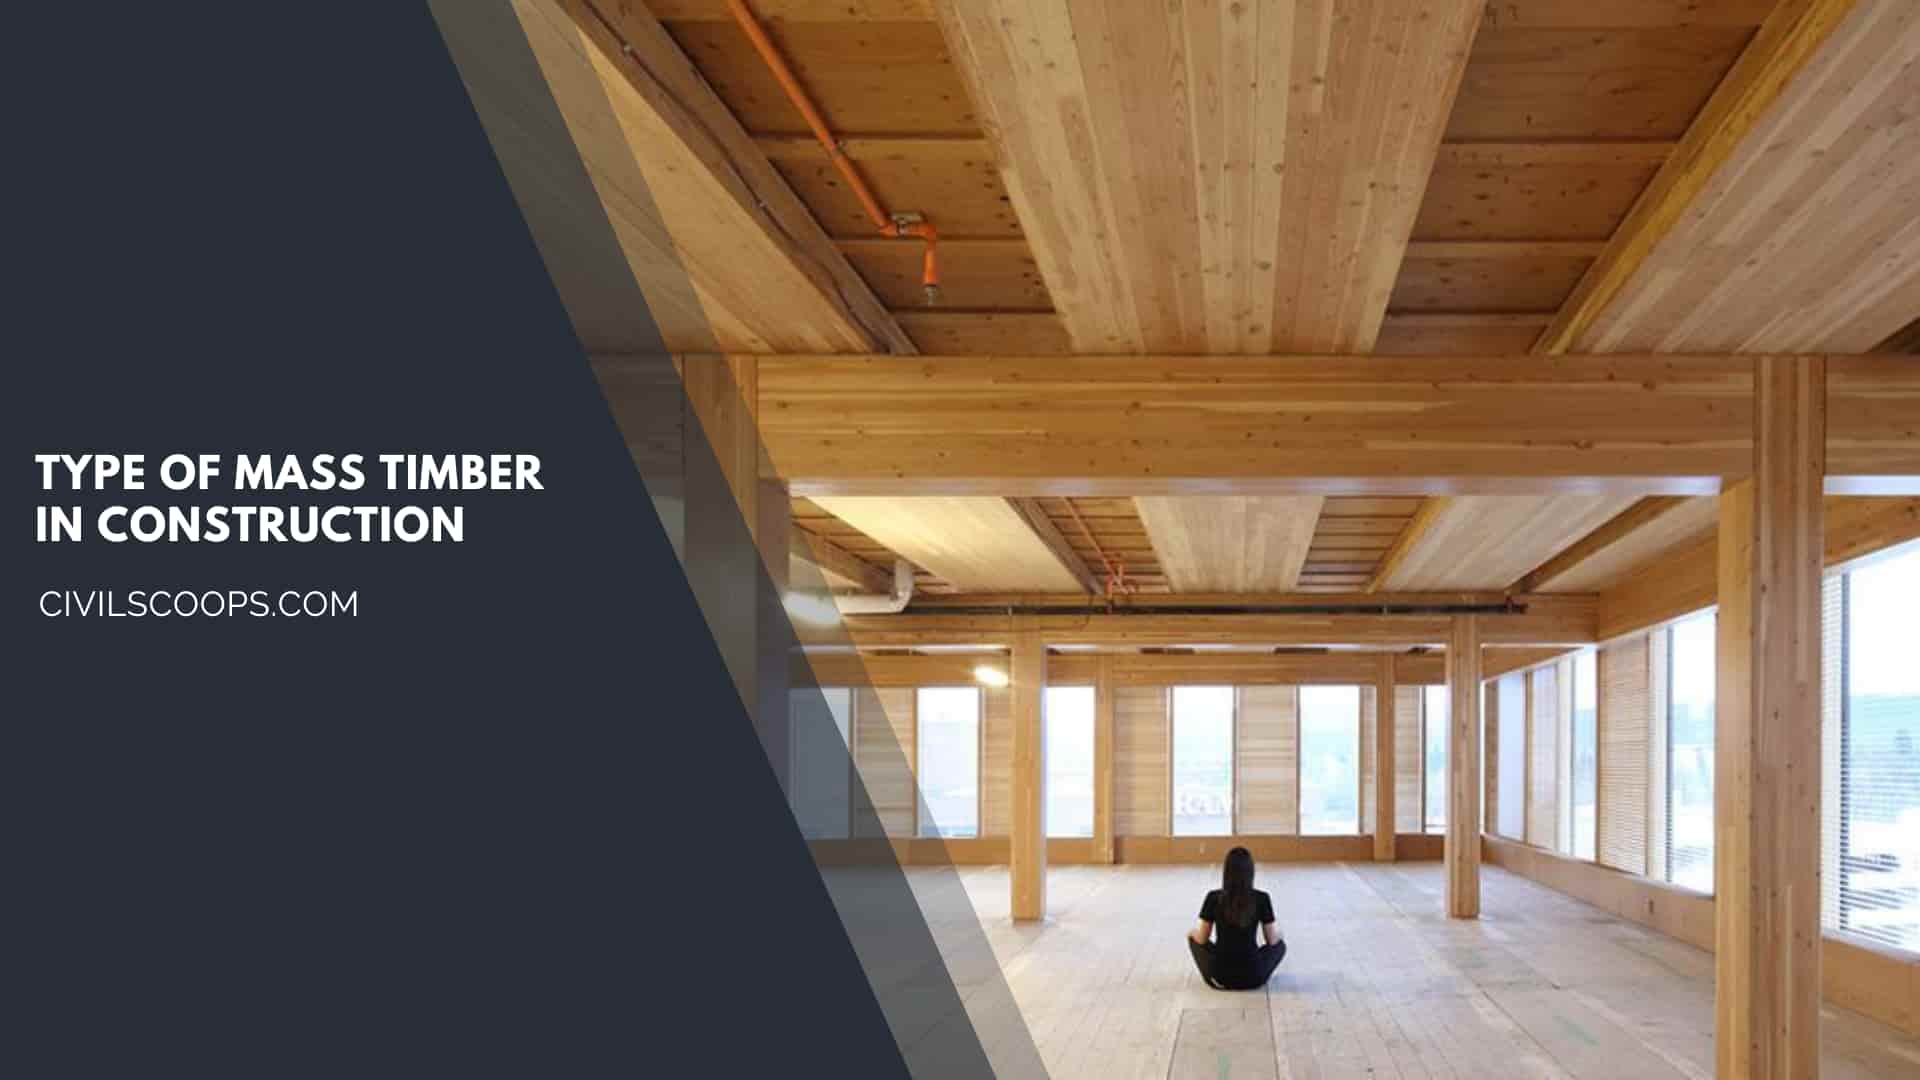 Type of Mass Timber in Construction